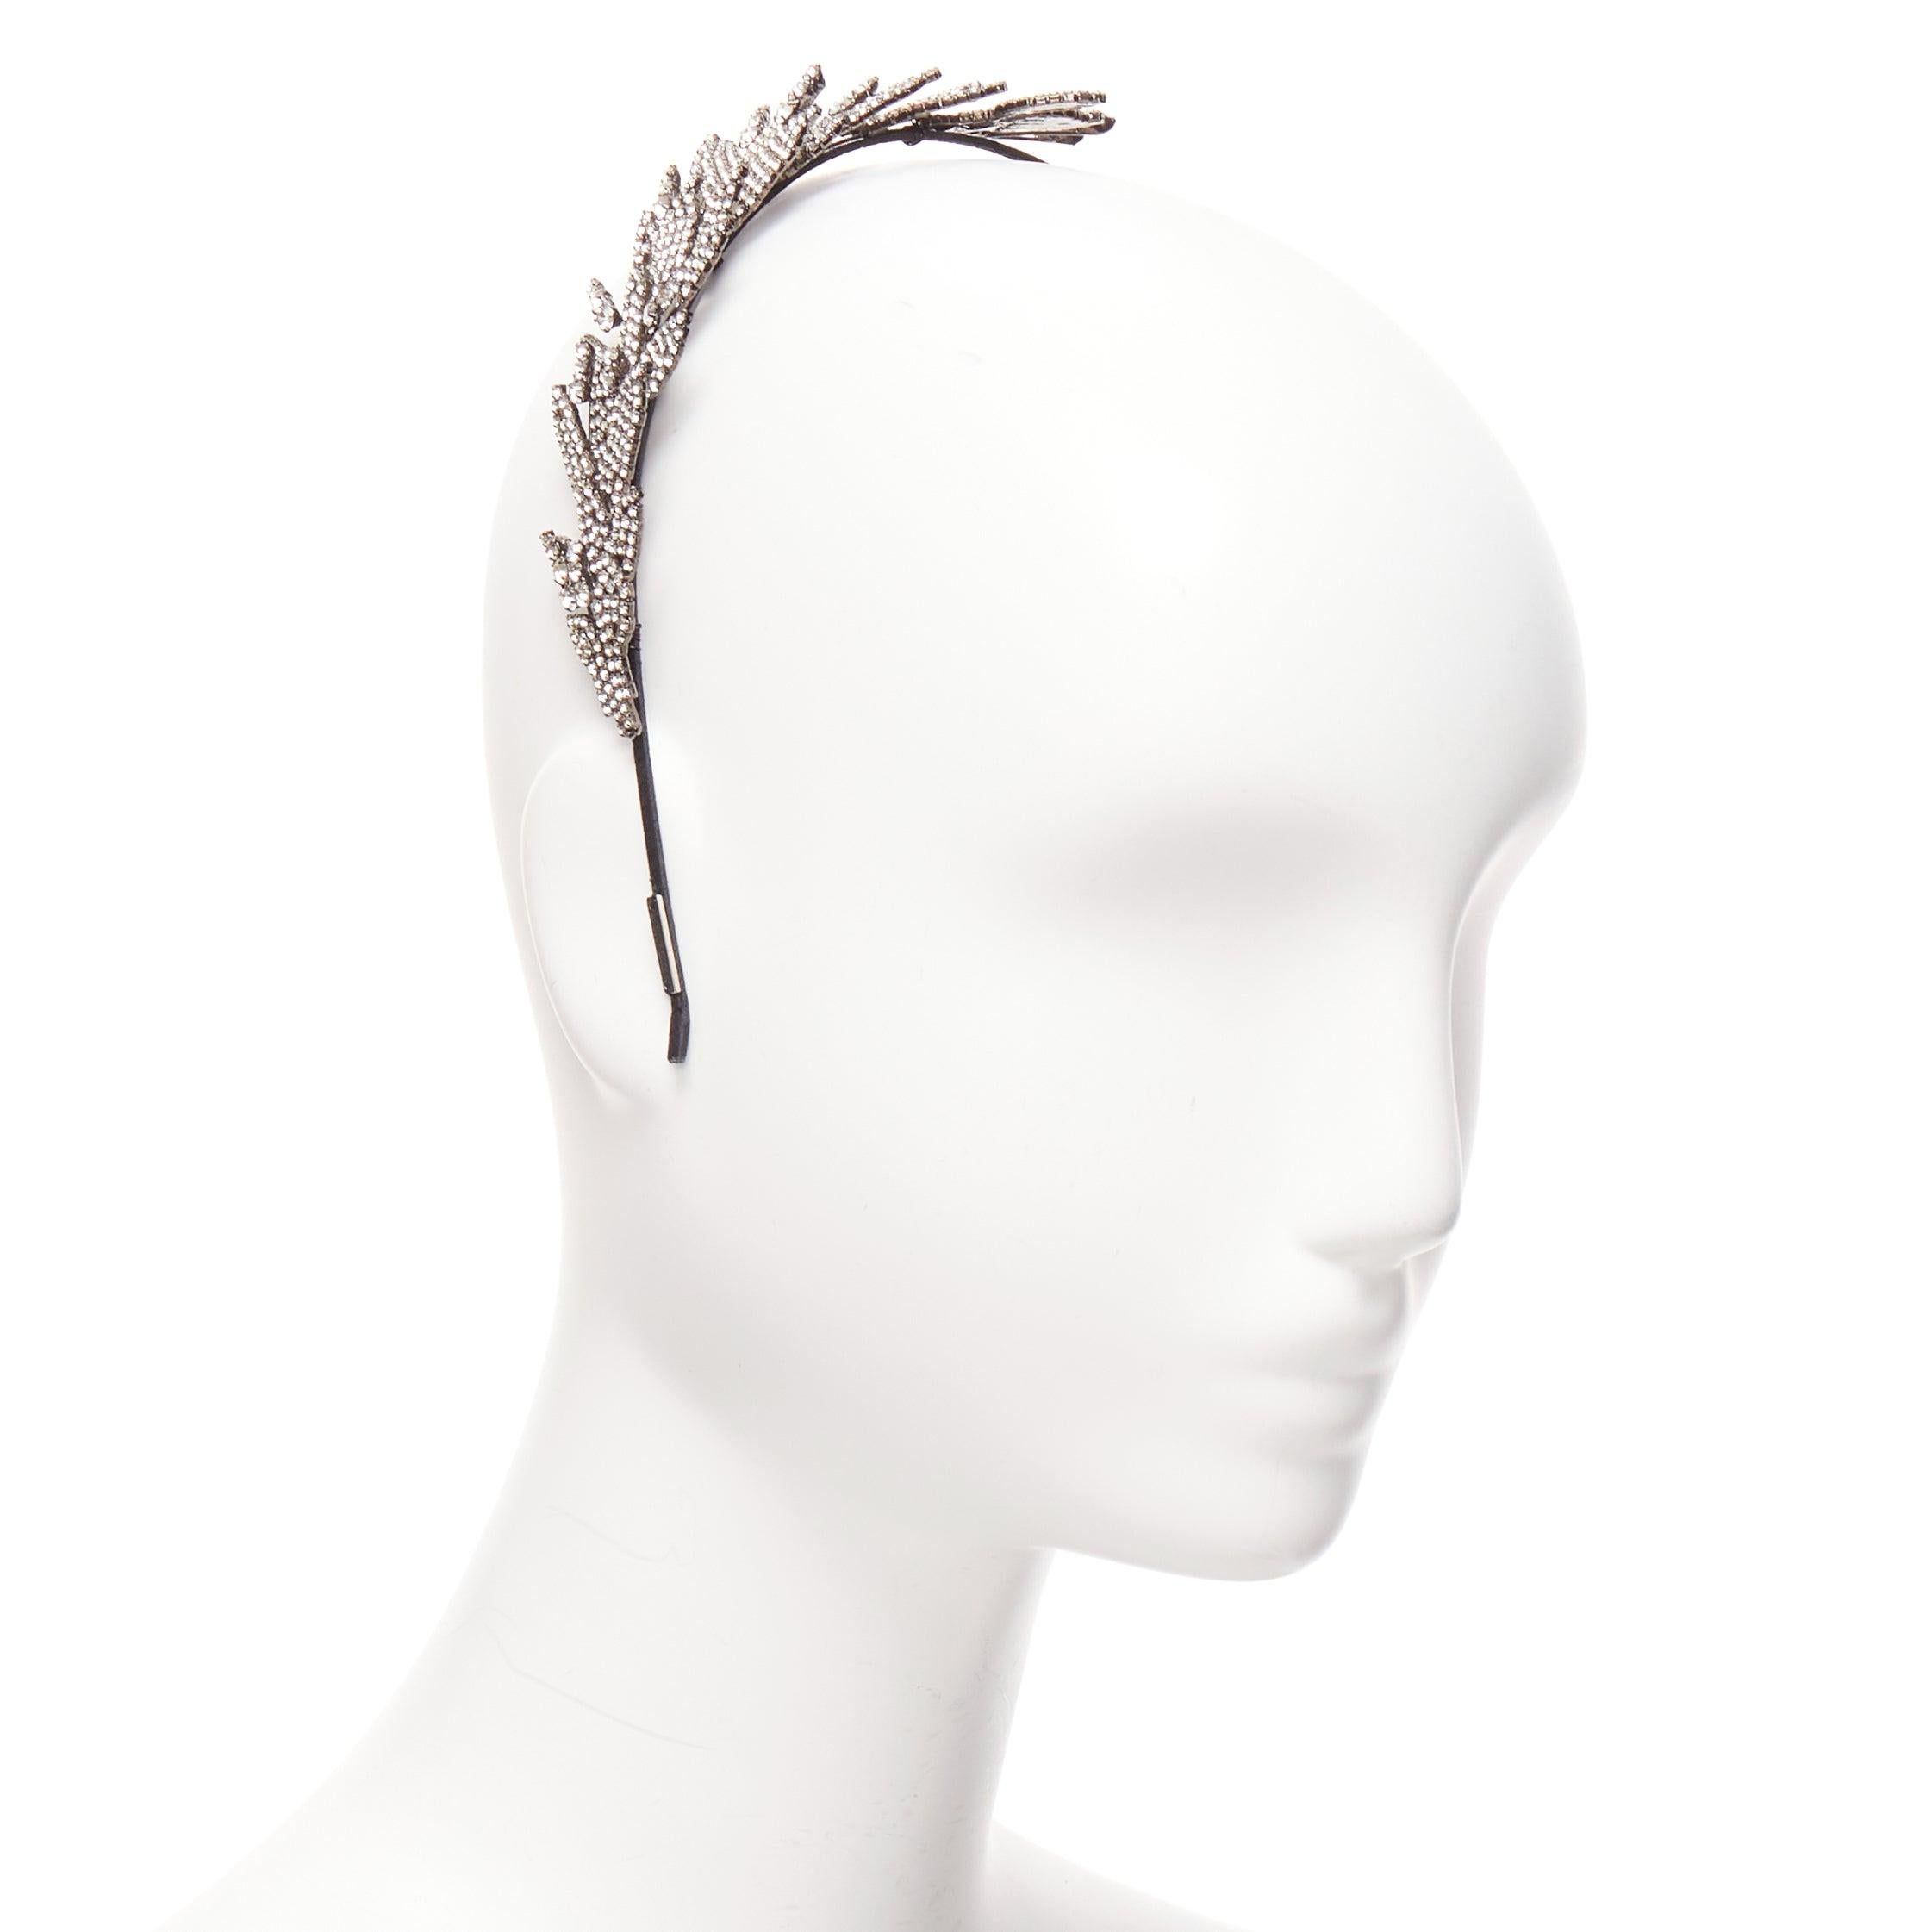 JENNIFER BEHR silver crystal tiered leaves black fabric wrap Alice headband
Reference: AAWC/A01005
Brand: Jennifer Behr
Material: Fabric, Metal
Color: Silver, Black
Pattern: Floral
Lining: Black Fabric

CONDITION:
Condition: Very good, this item was